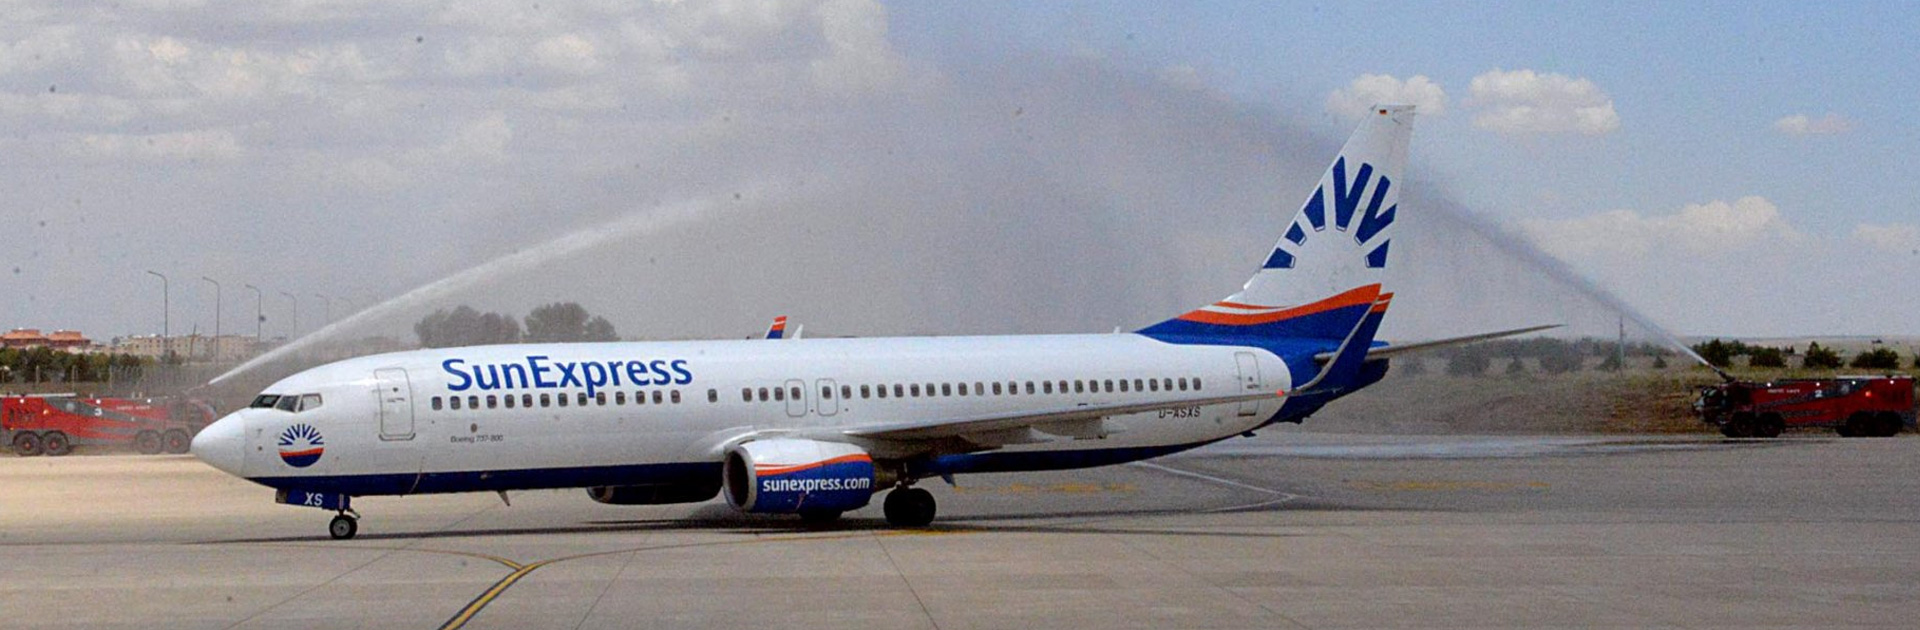 SunExpress SAP IFRS 16 Project Kicked-off